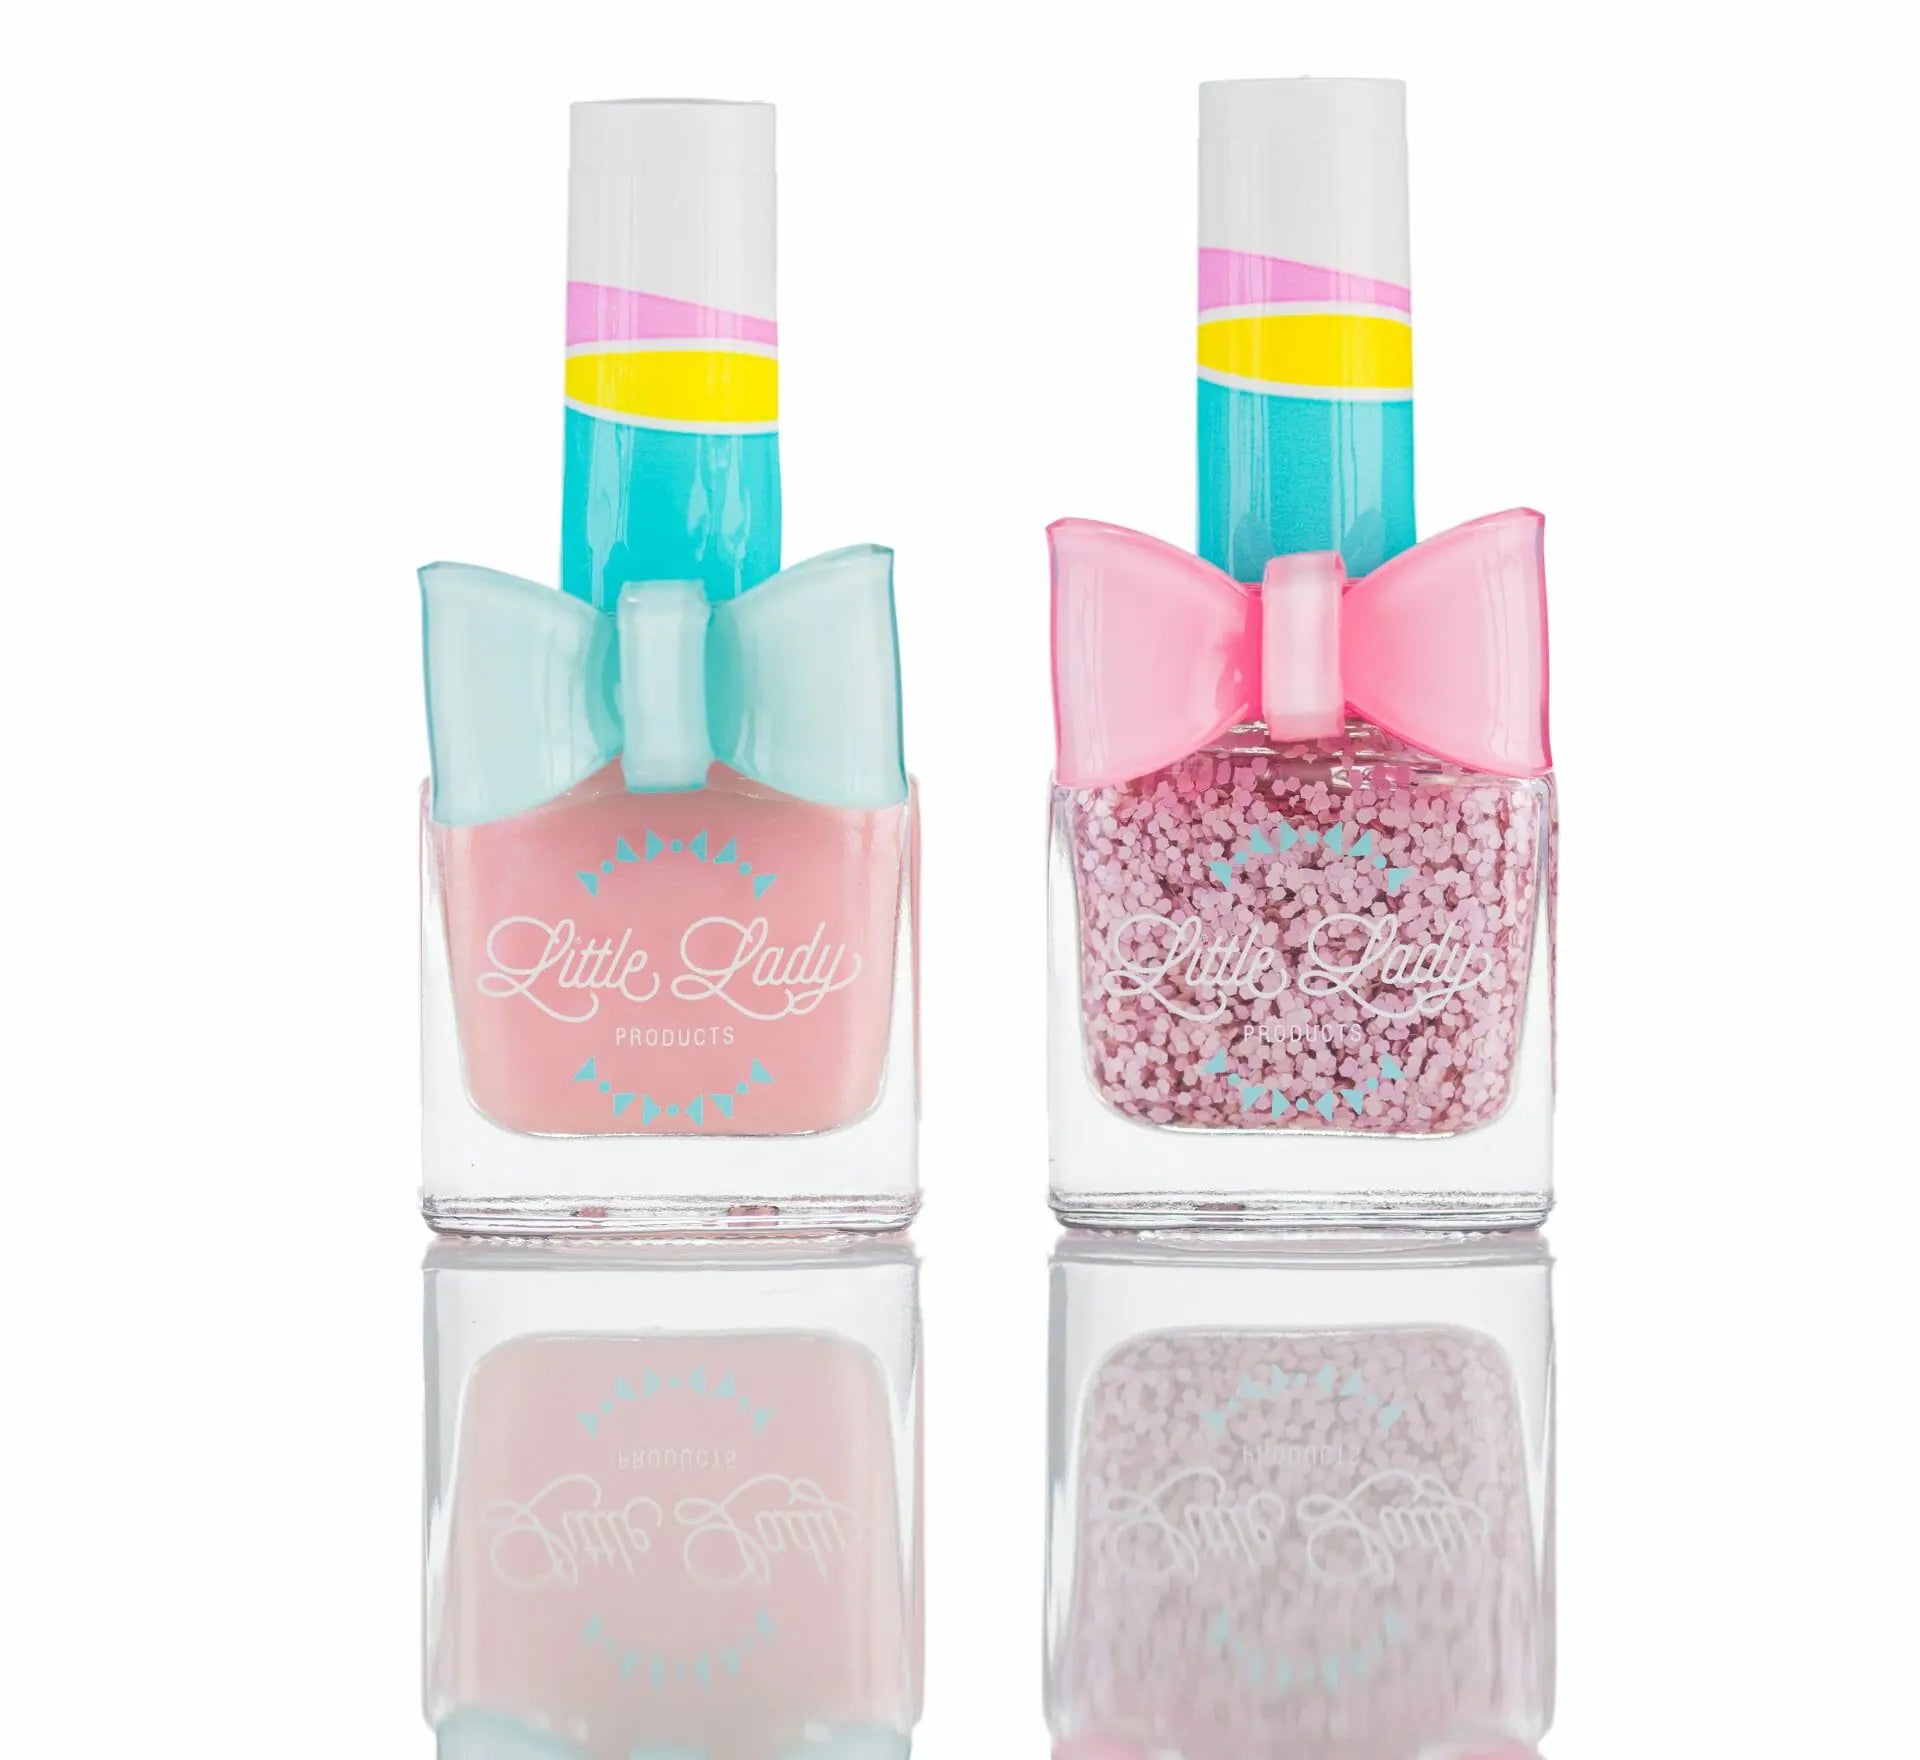 Rosey Ballerina Duo Scented Nail Polish - Twinkle Twinkle Little One